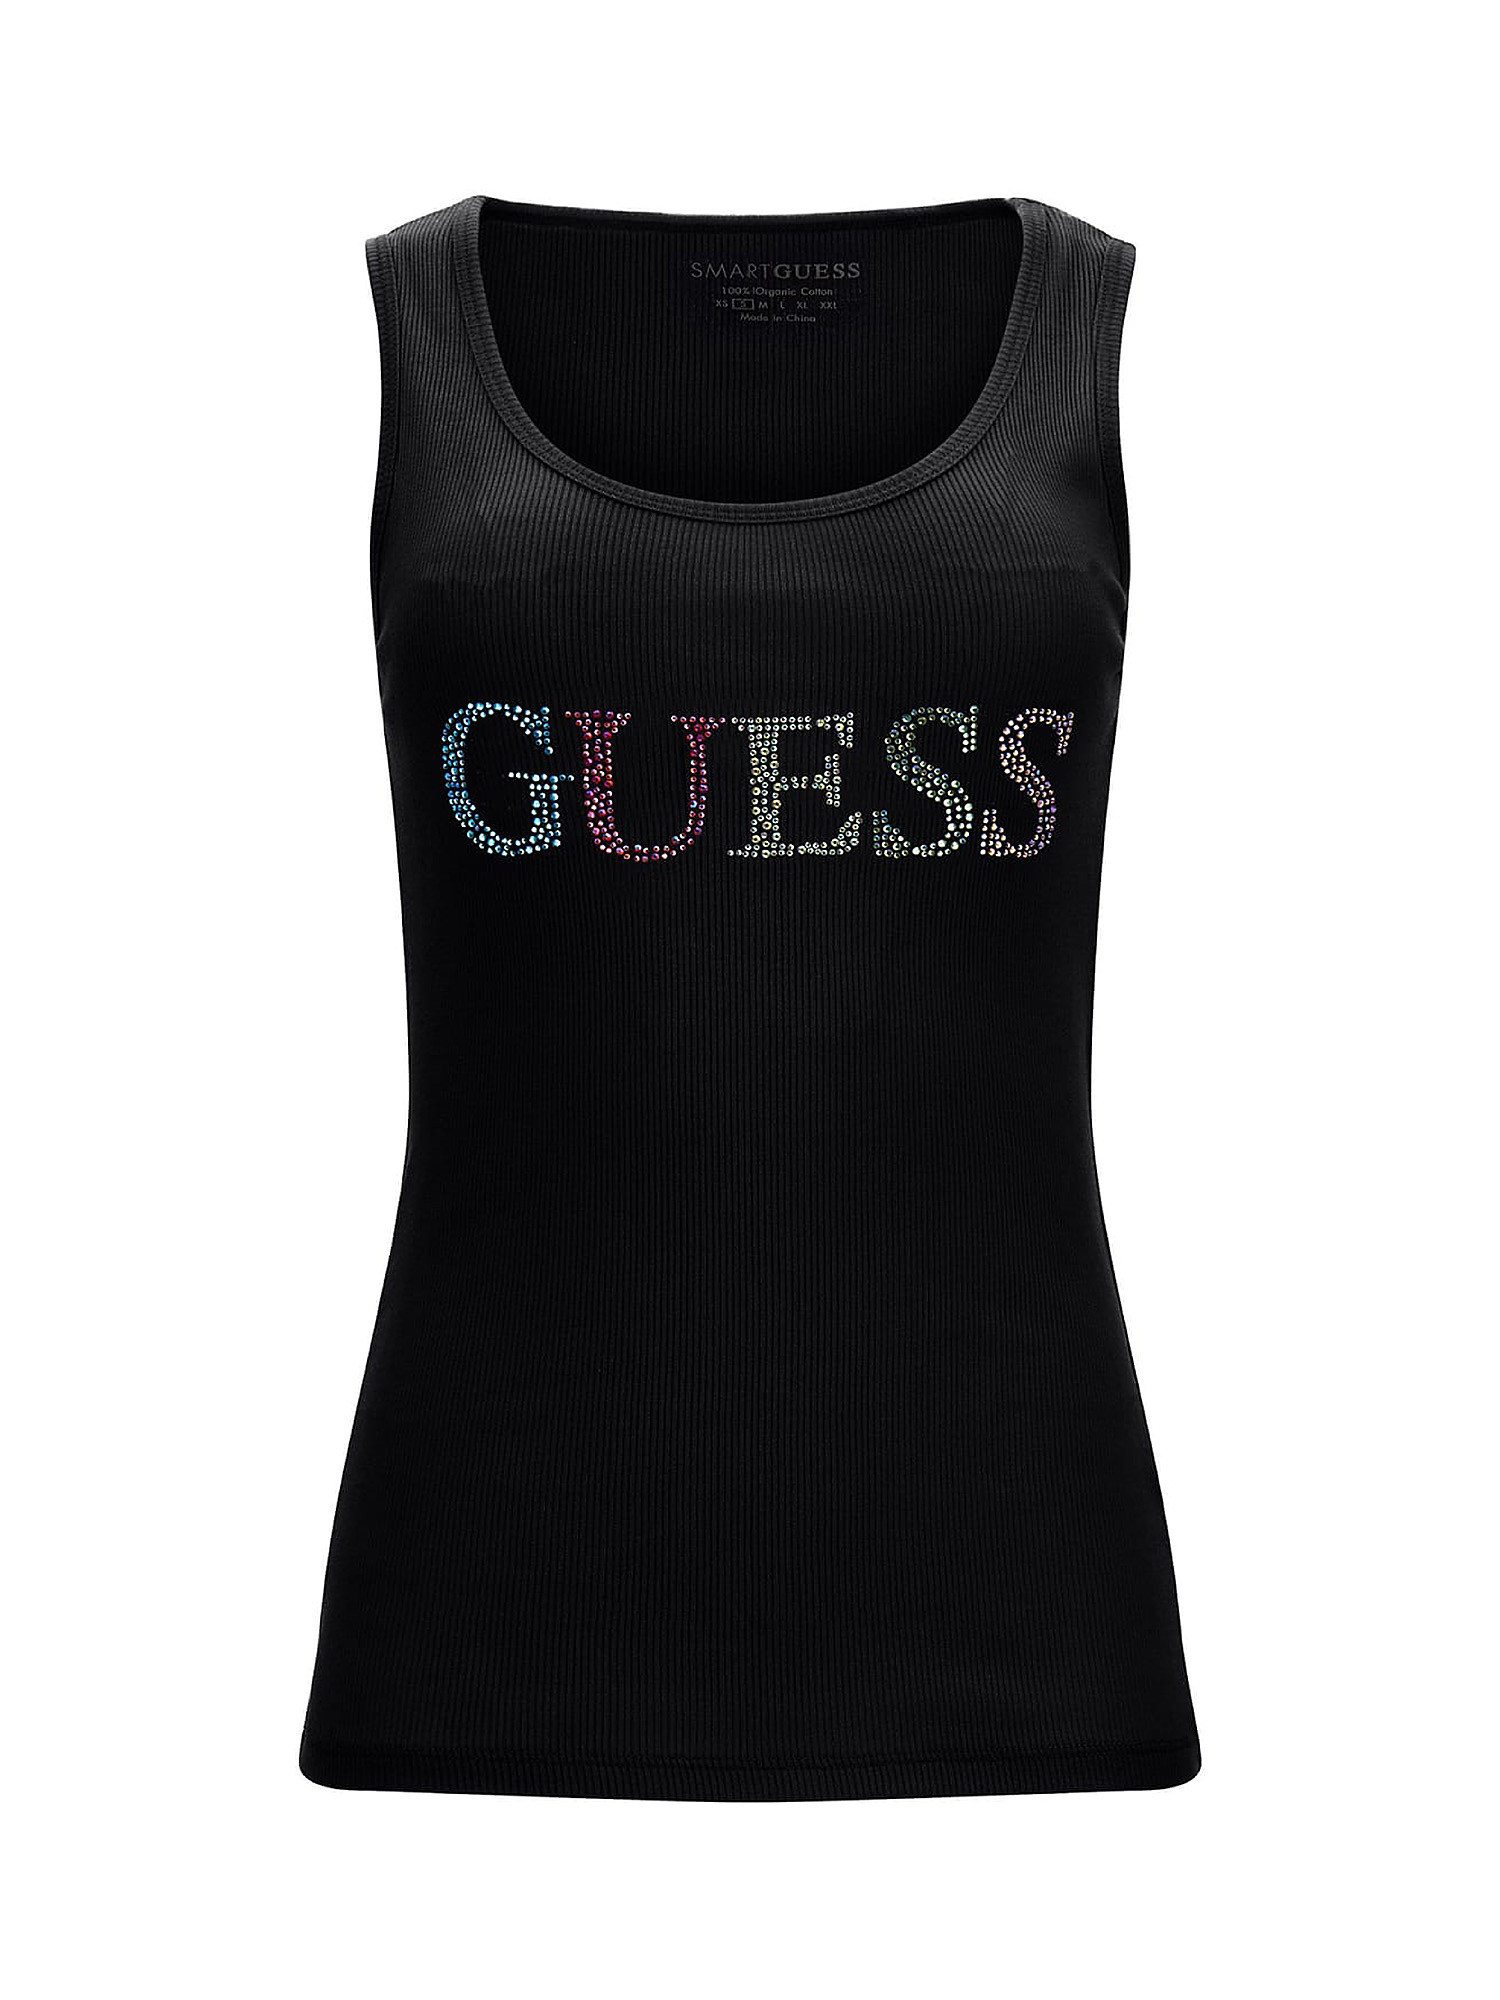 GUESS - Cotton tank top with logo, Black, large image number 0